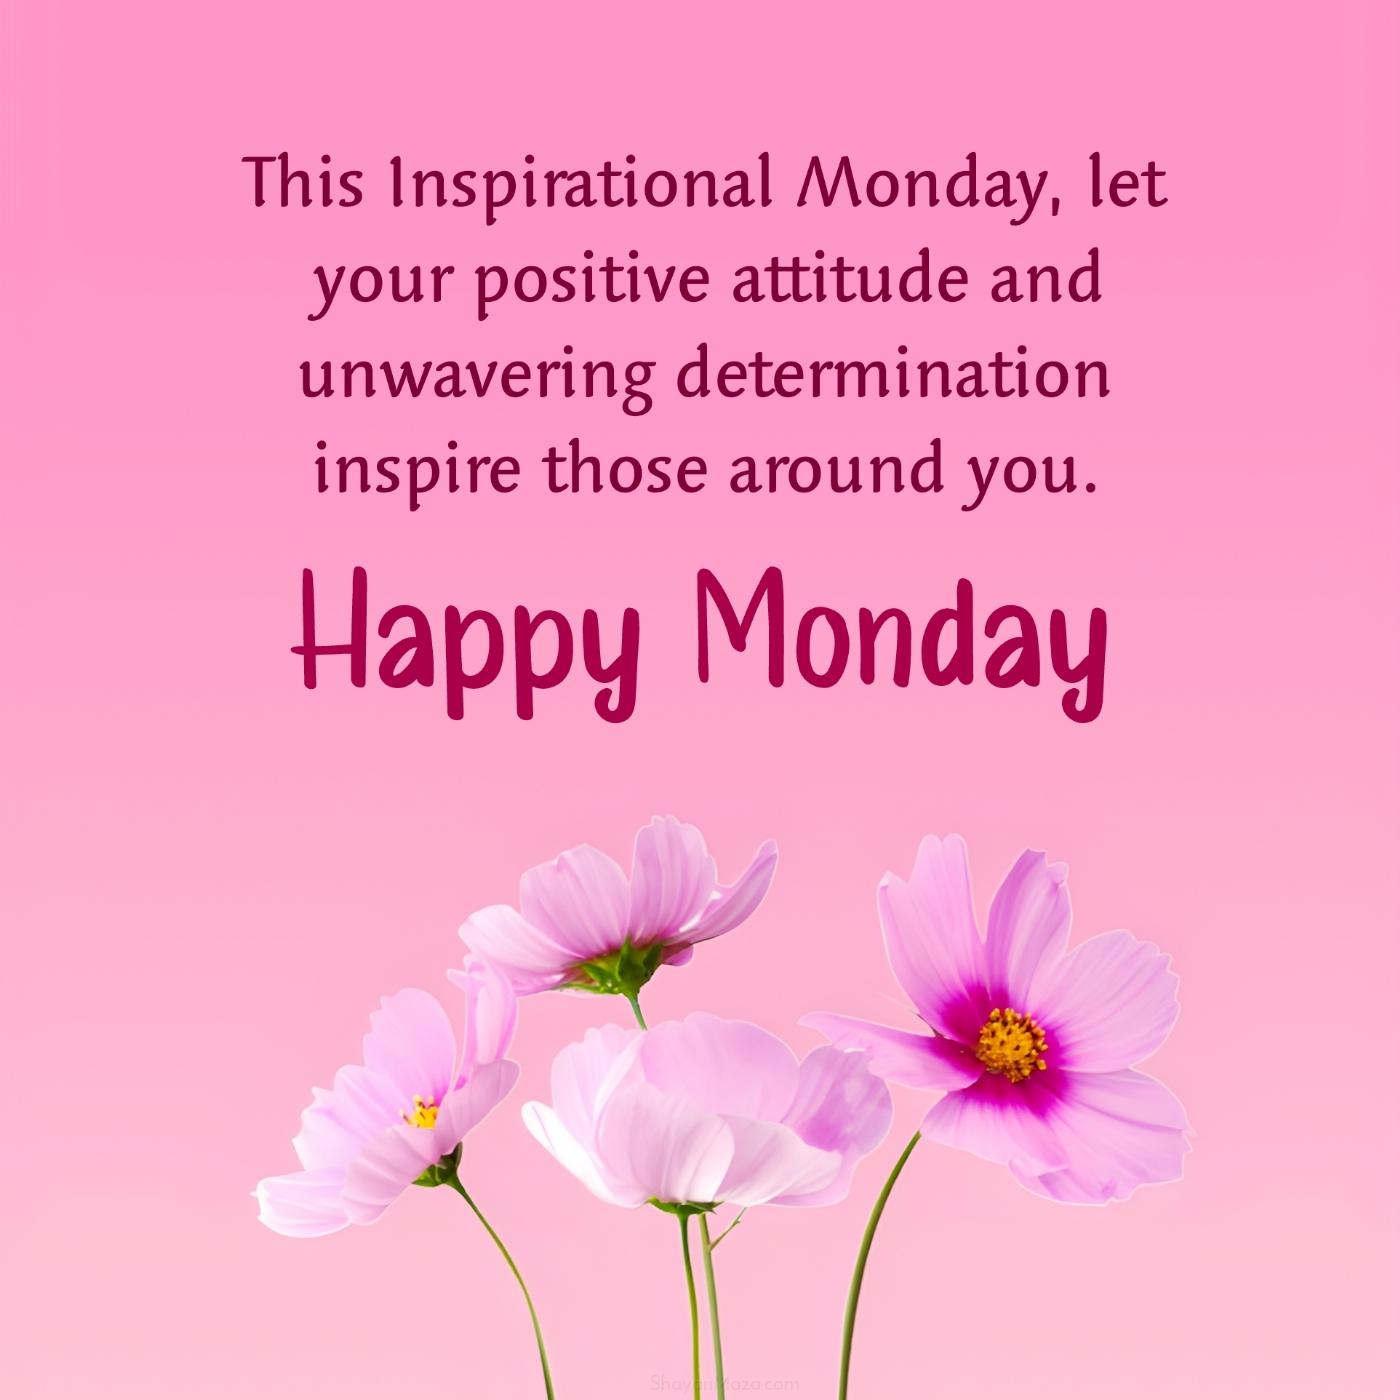 This Inspirational Monday let your positive attitude and unwavering determination inspire